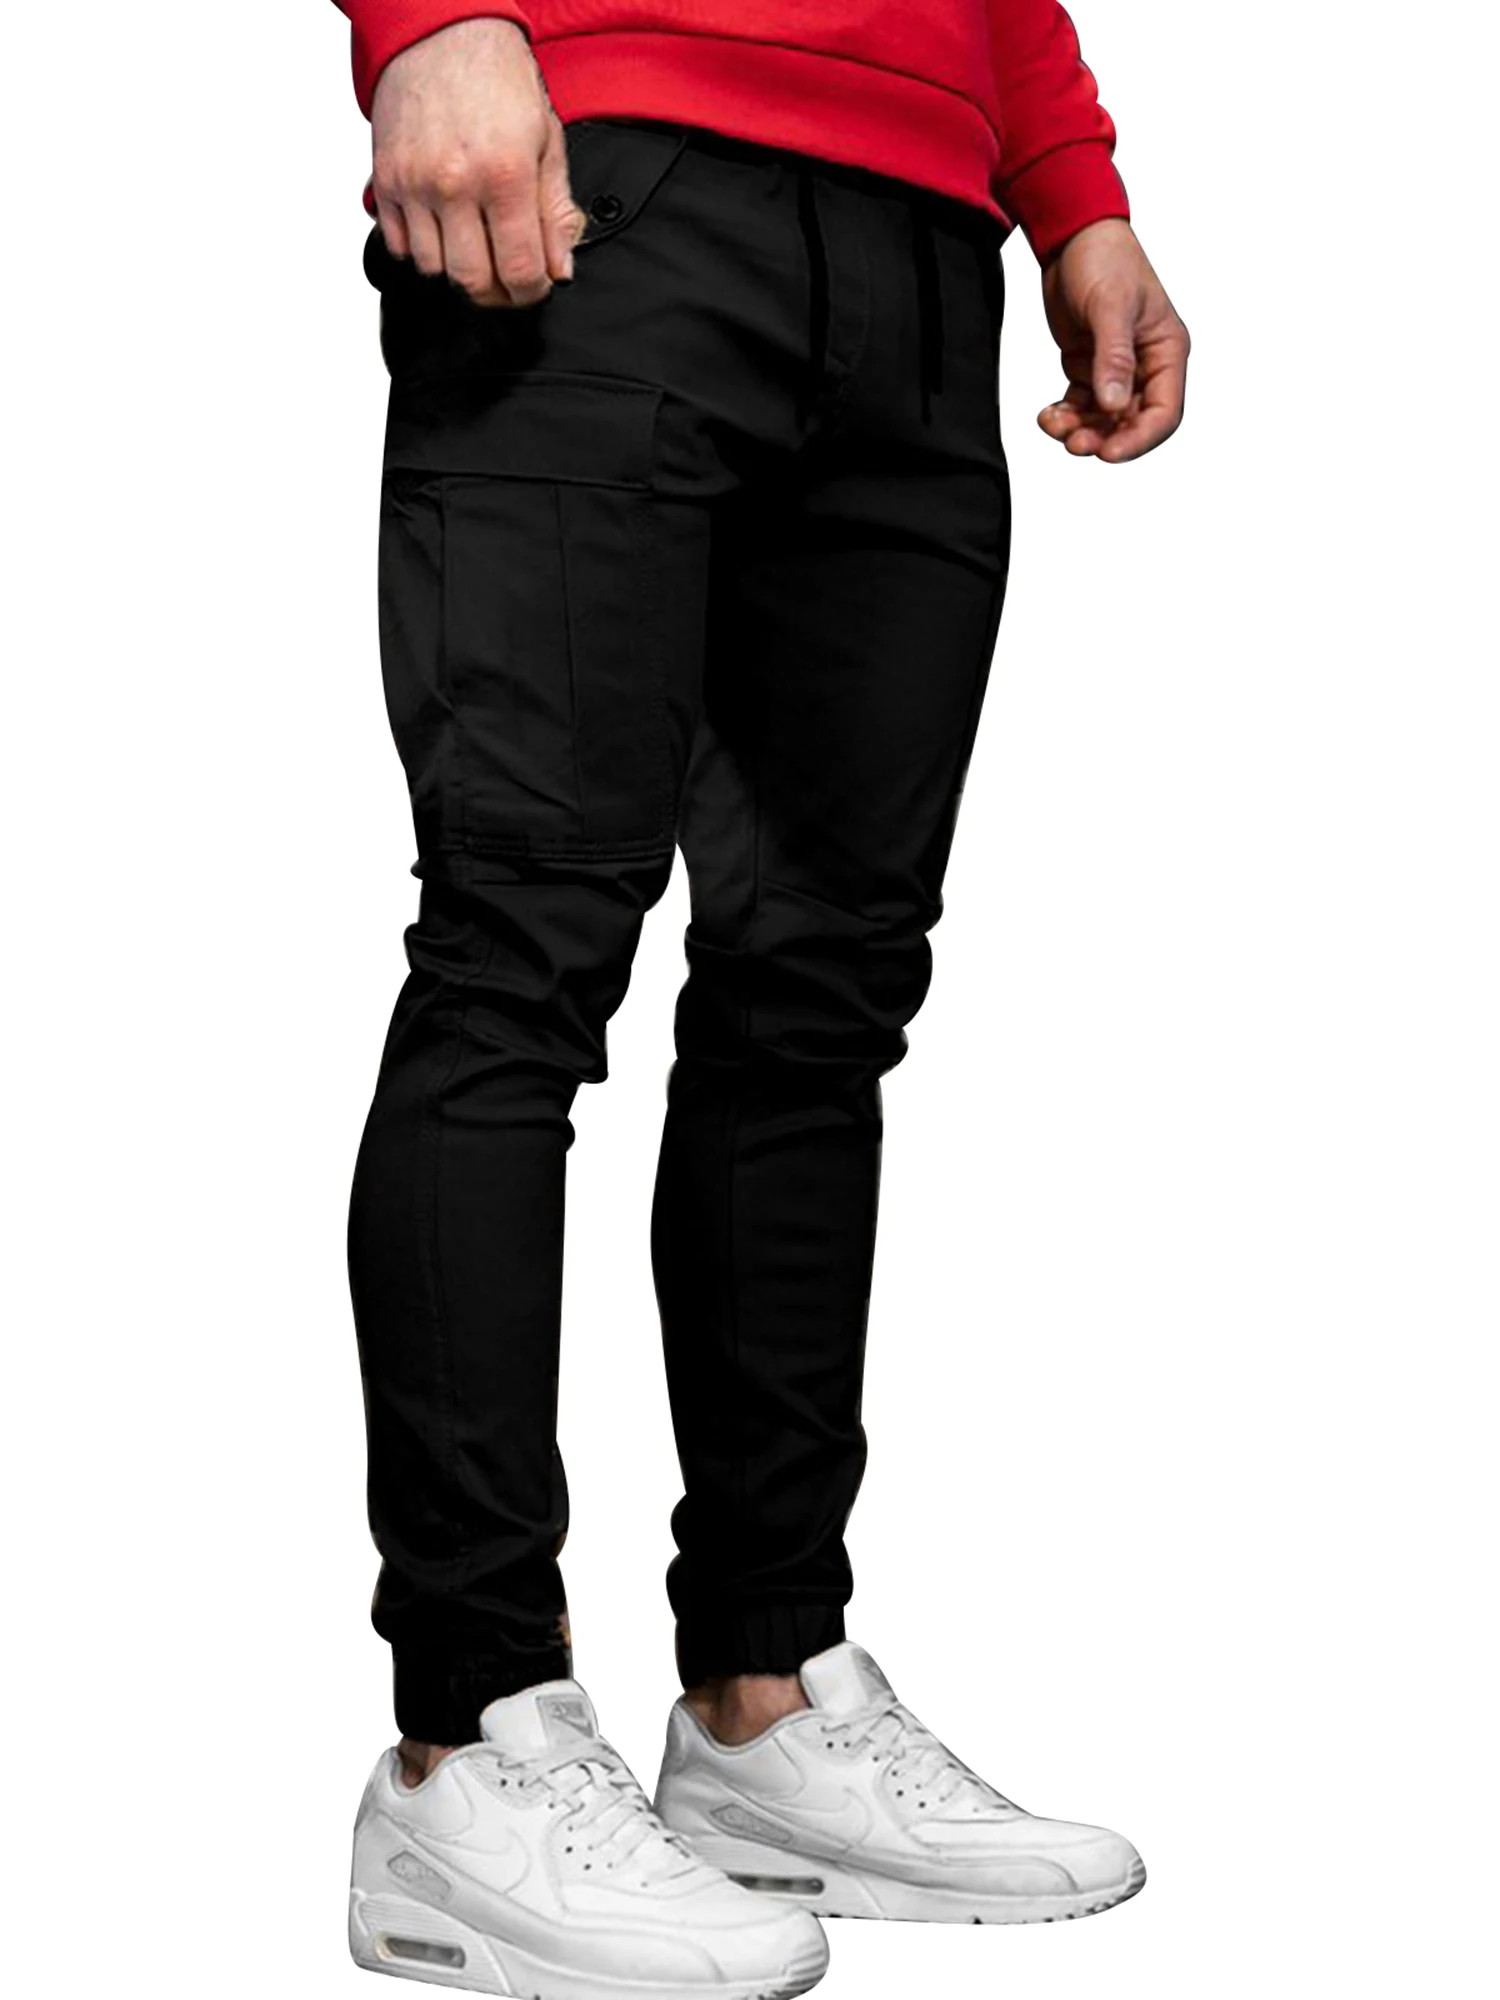 CARETOO Jogger Cargo Mens Chino Jeans Pants Autumn Winter Stretch Leisure Trousers 